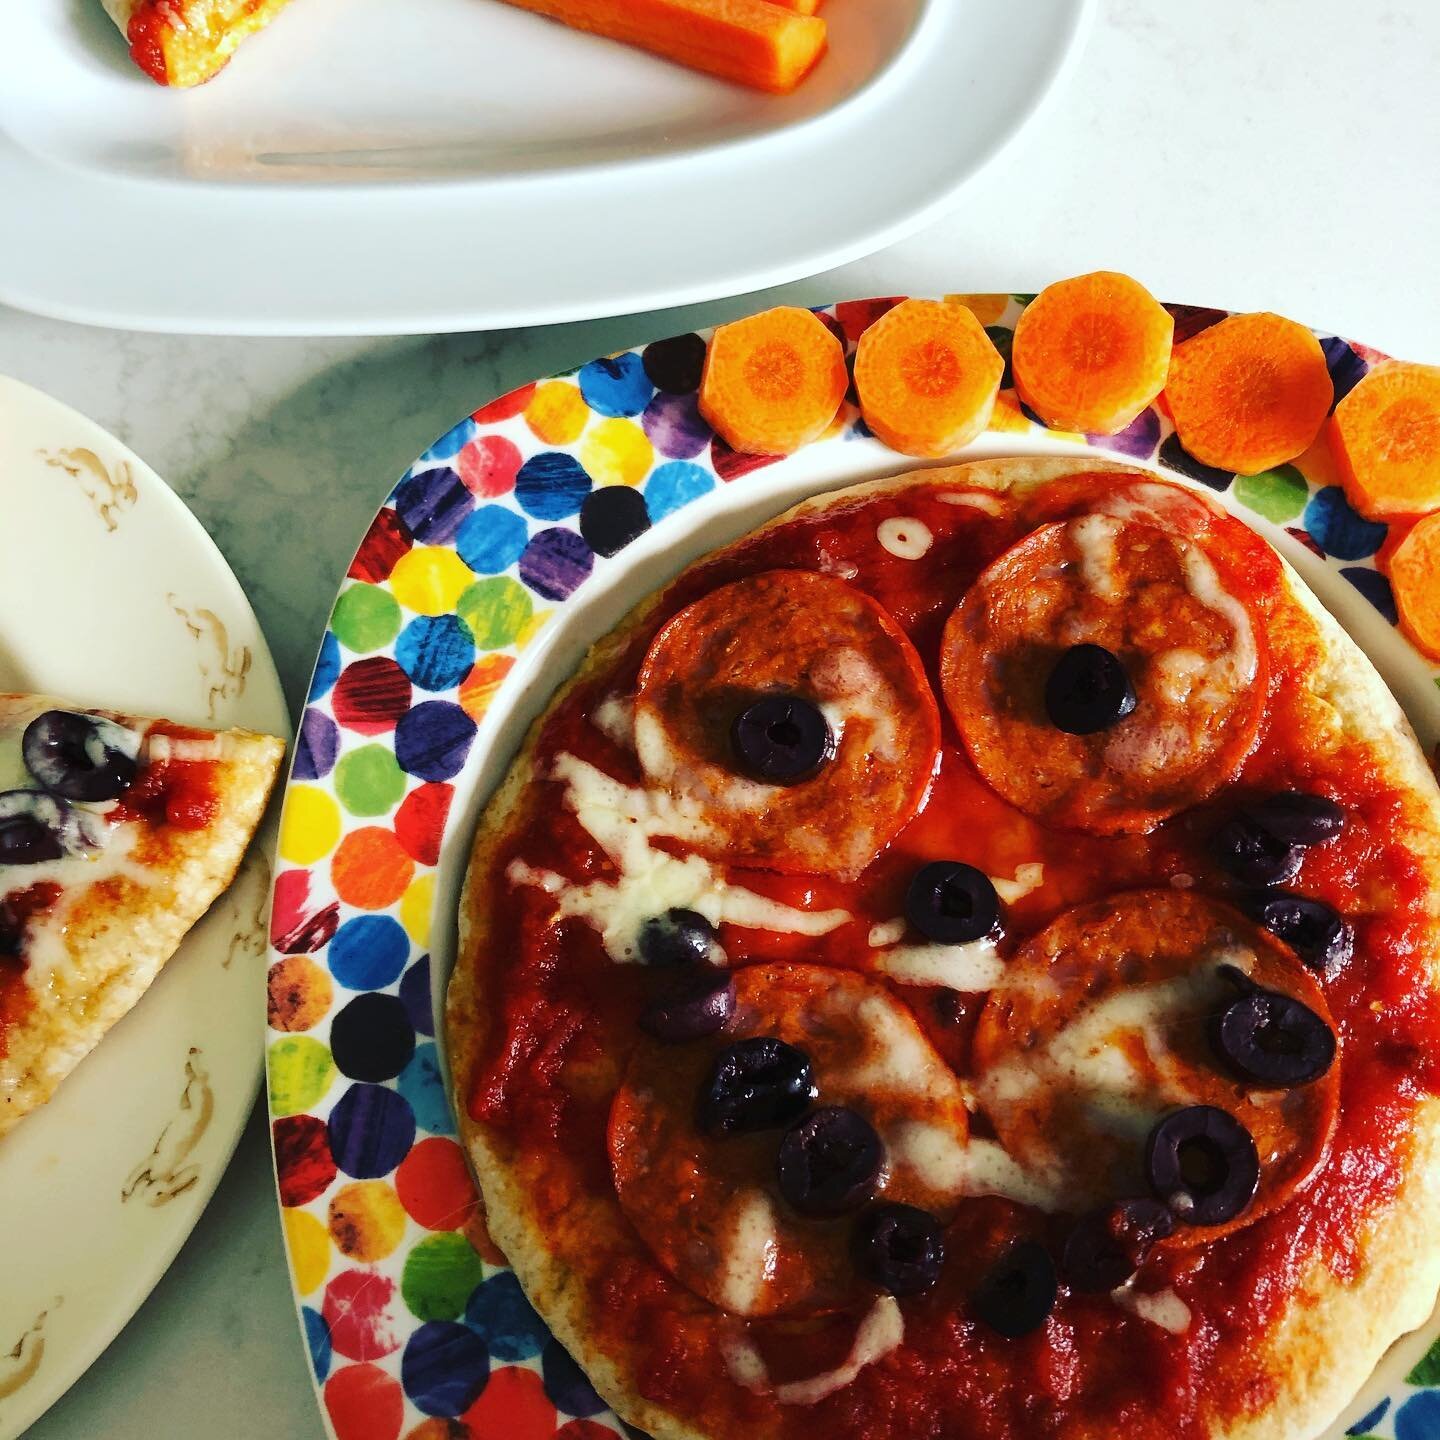 Most popular lunch around here. The kids love putting the toppings on their own pizzas and there&rsquo;s always a happy face in the bunch! 🤣 Happy Wednesday! #pitapizzaparty #virtualschoollunchbreak #kidslunch #lunchtime #pizzatime #happytummies